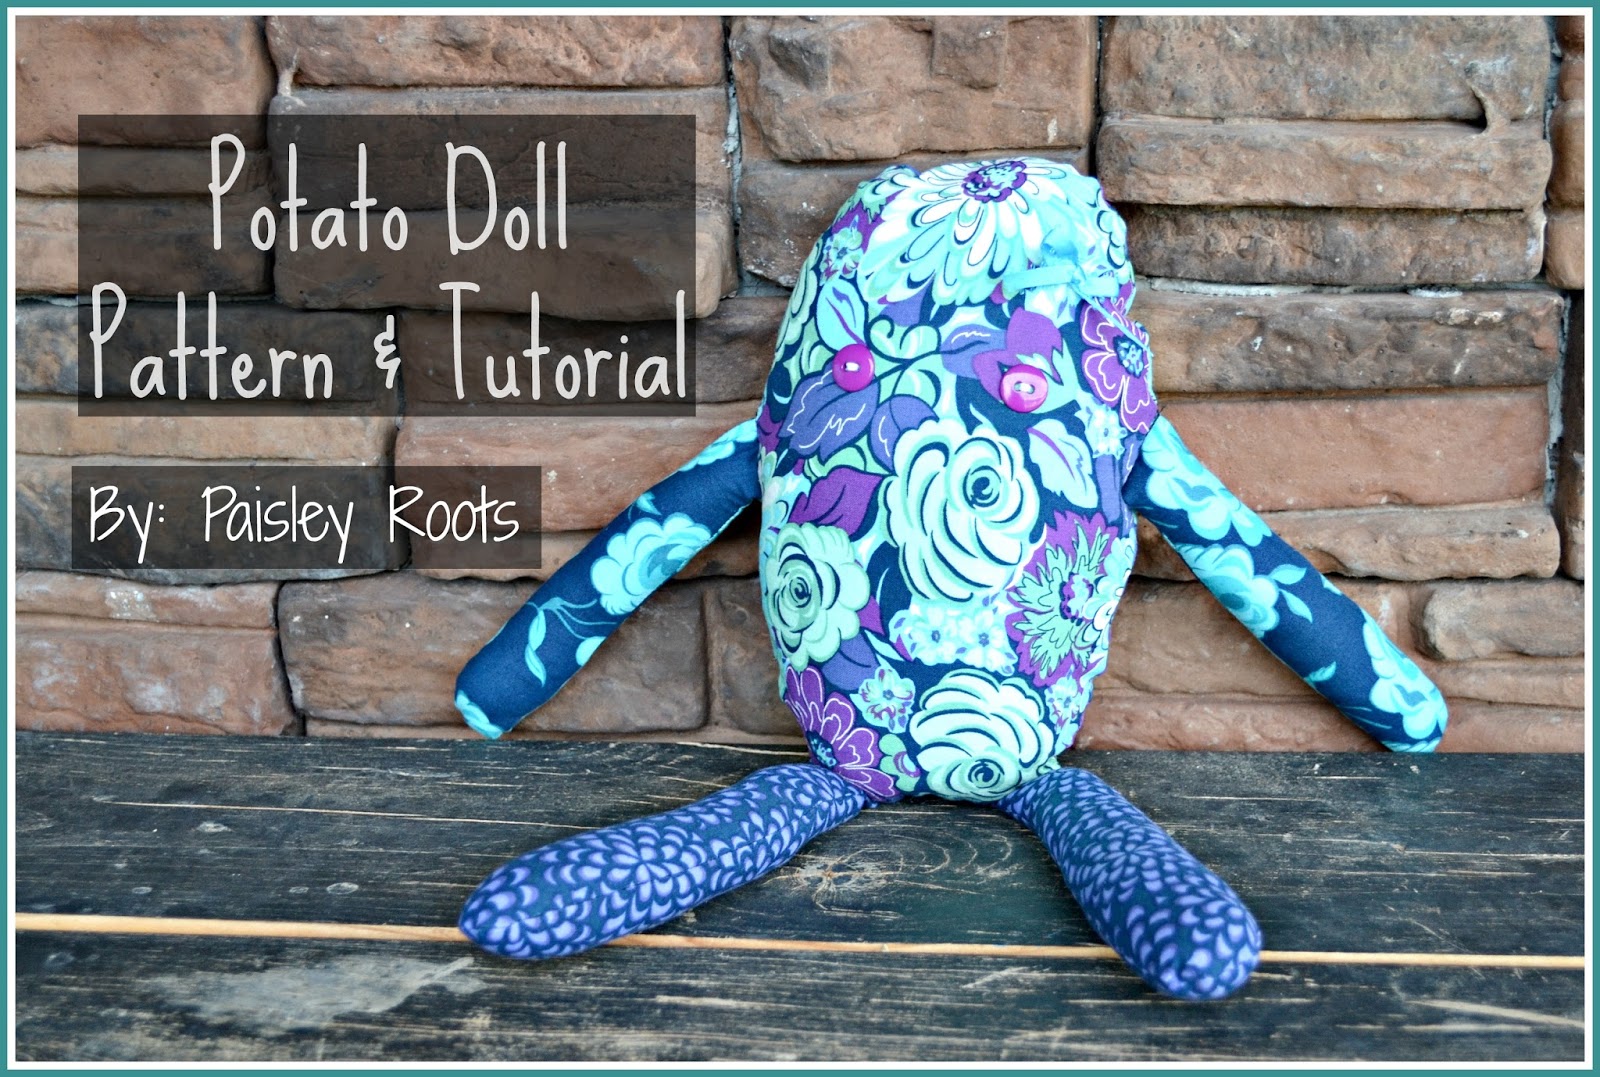 Potato Doll Pattern & Tutorial / by Paisley Roots for Busy Mom's Helper #sewing #patterns #kidcrafts